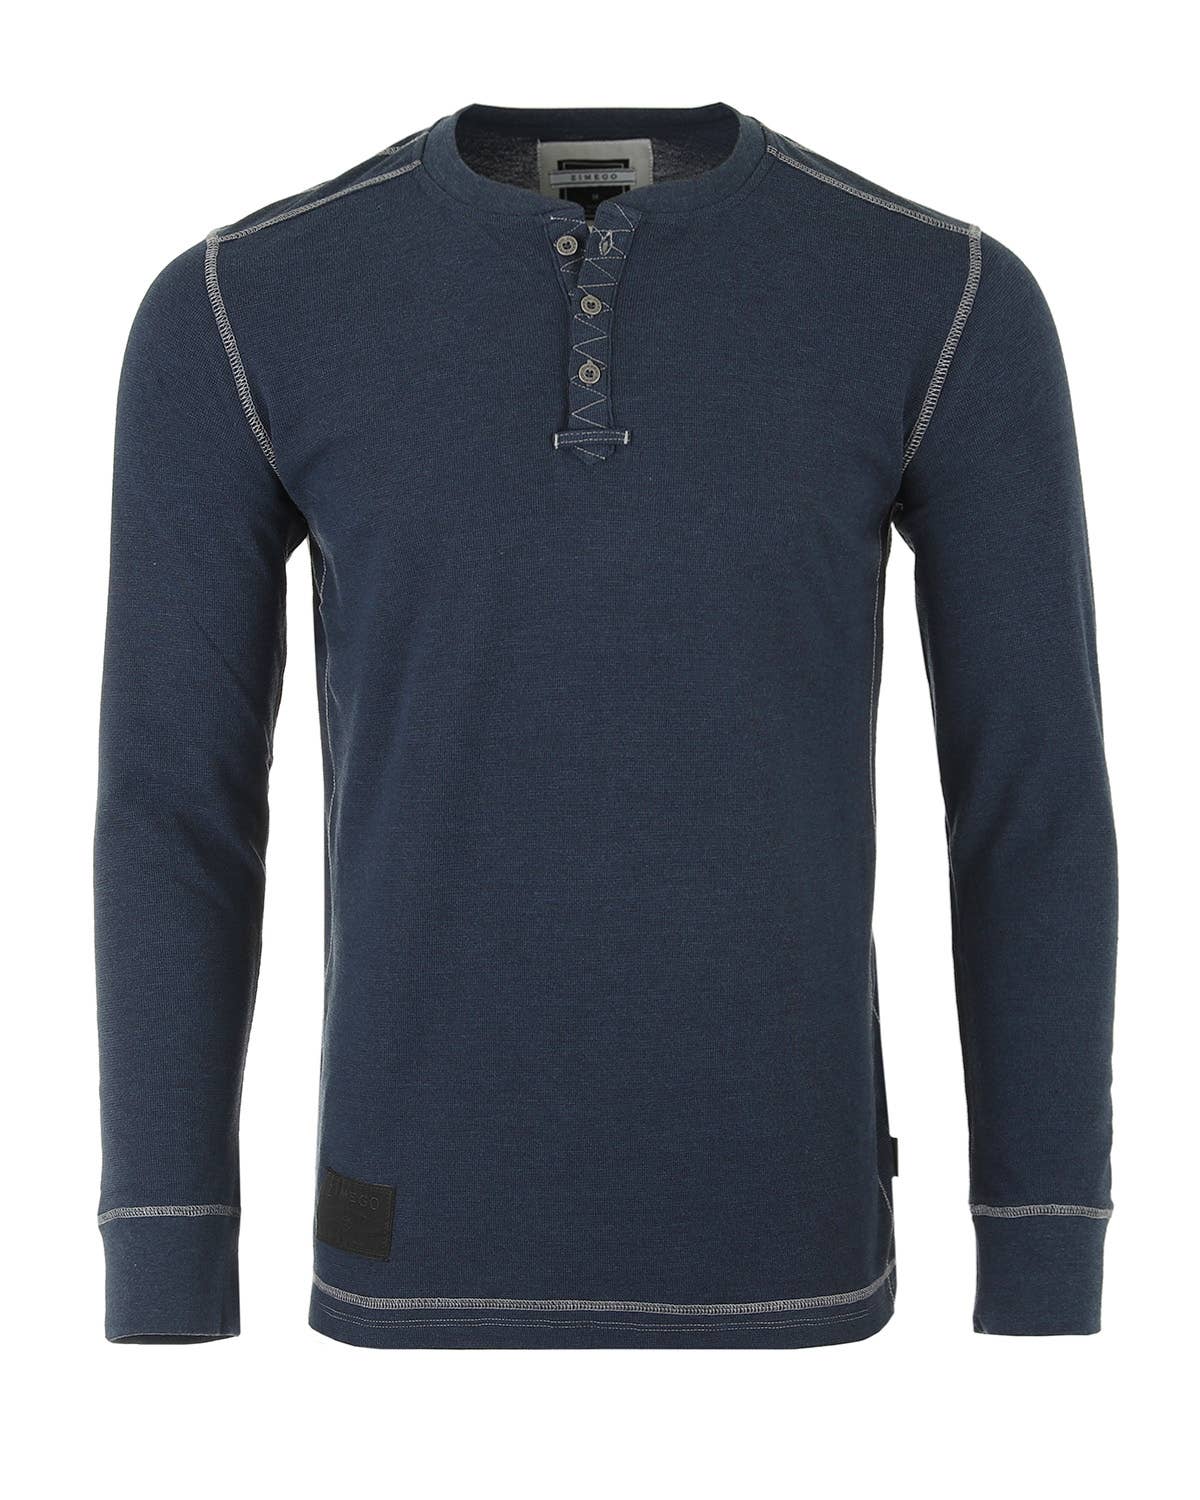 Long Sleeve Lightweight Thermal Athletic Henley